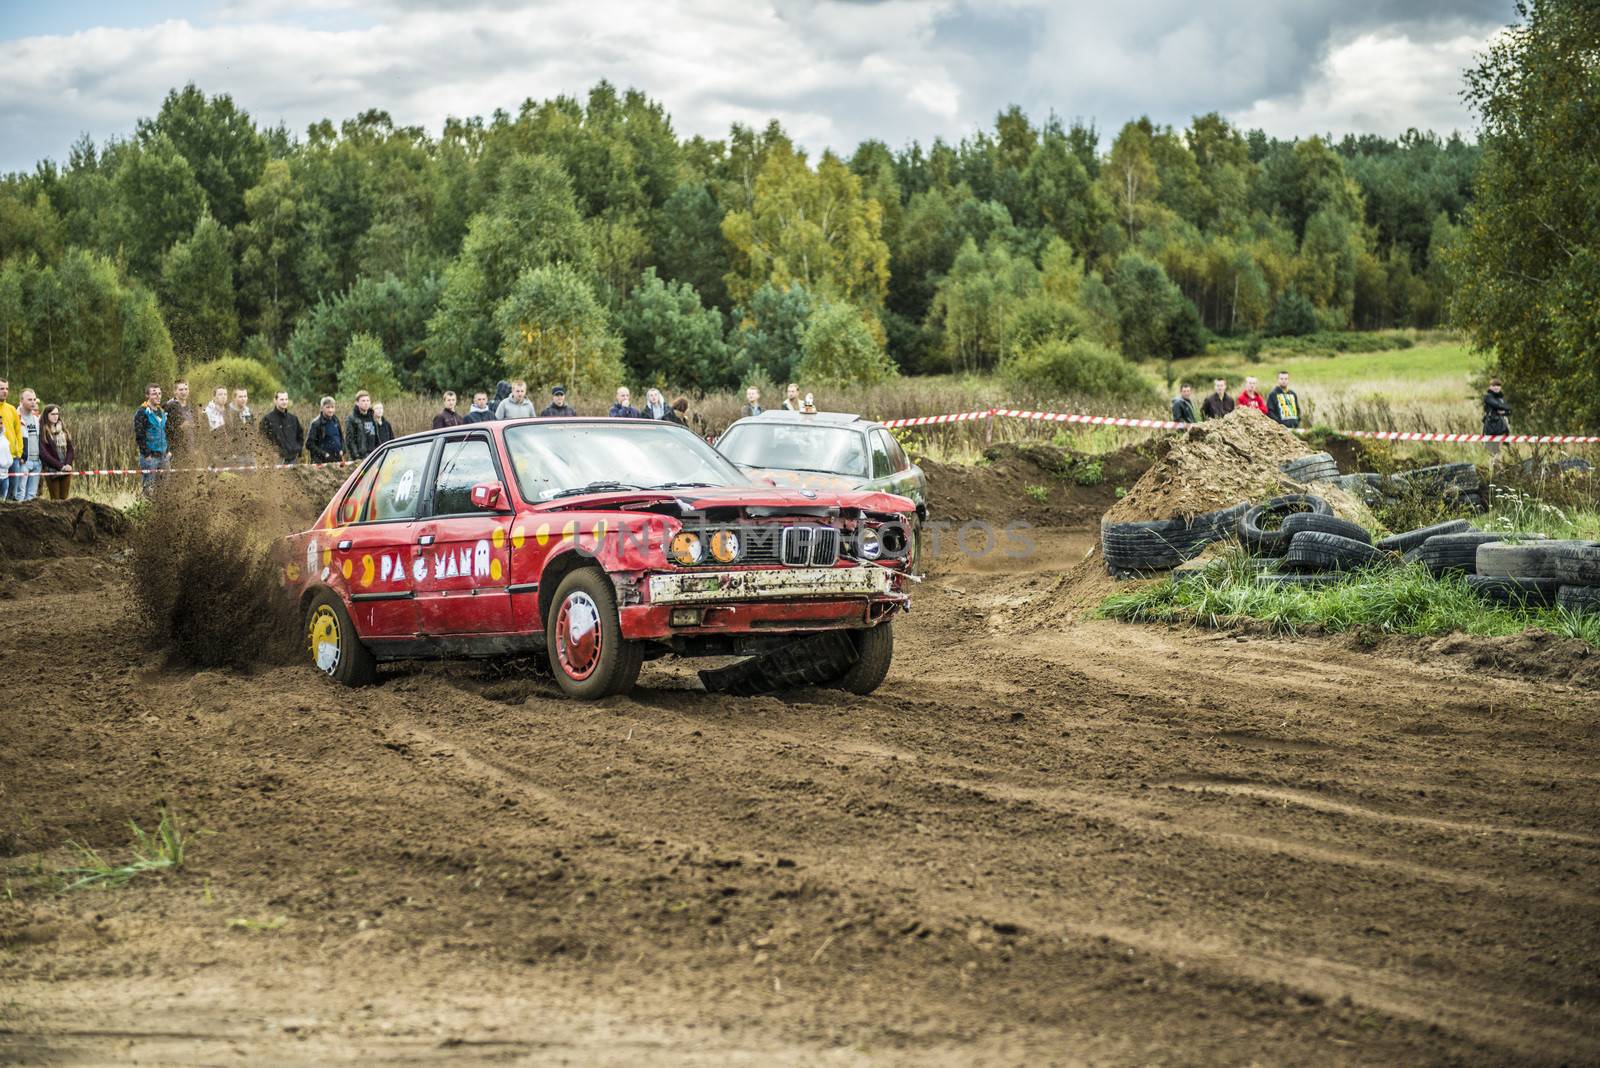 IGANIE, POLAND 29 SEPTEMBER, Wreck Car Racing Championship Finals on 29 September 2013 in Iganie, Poalnd